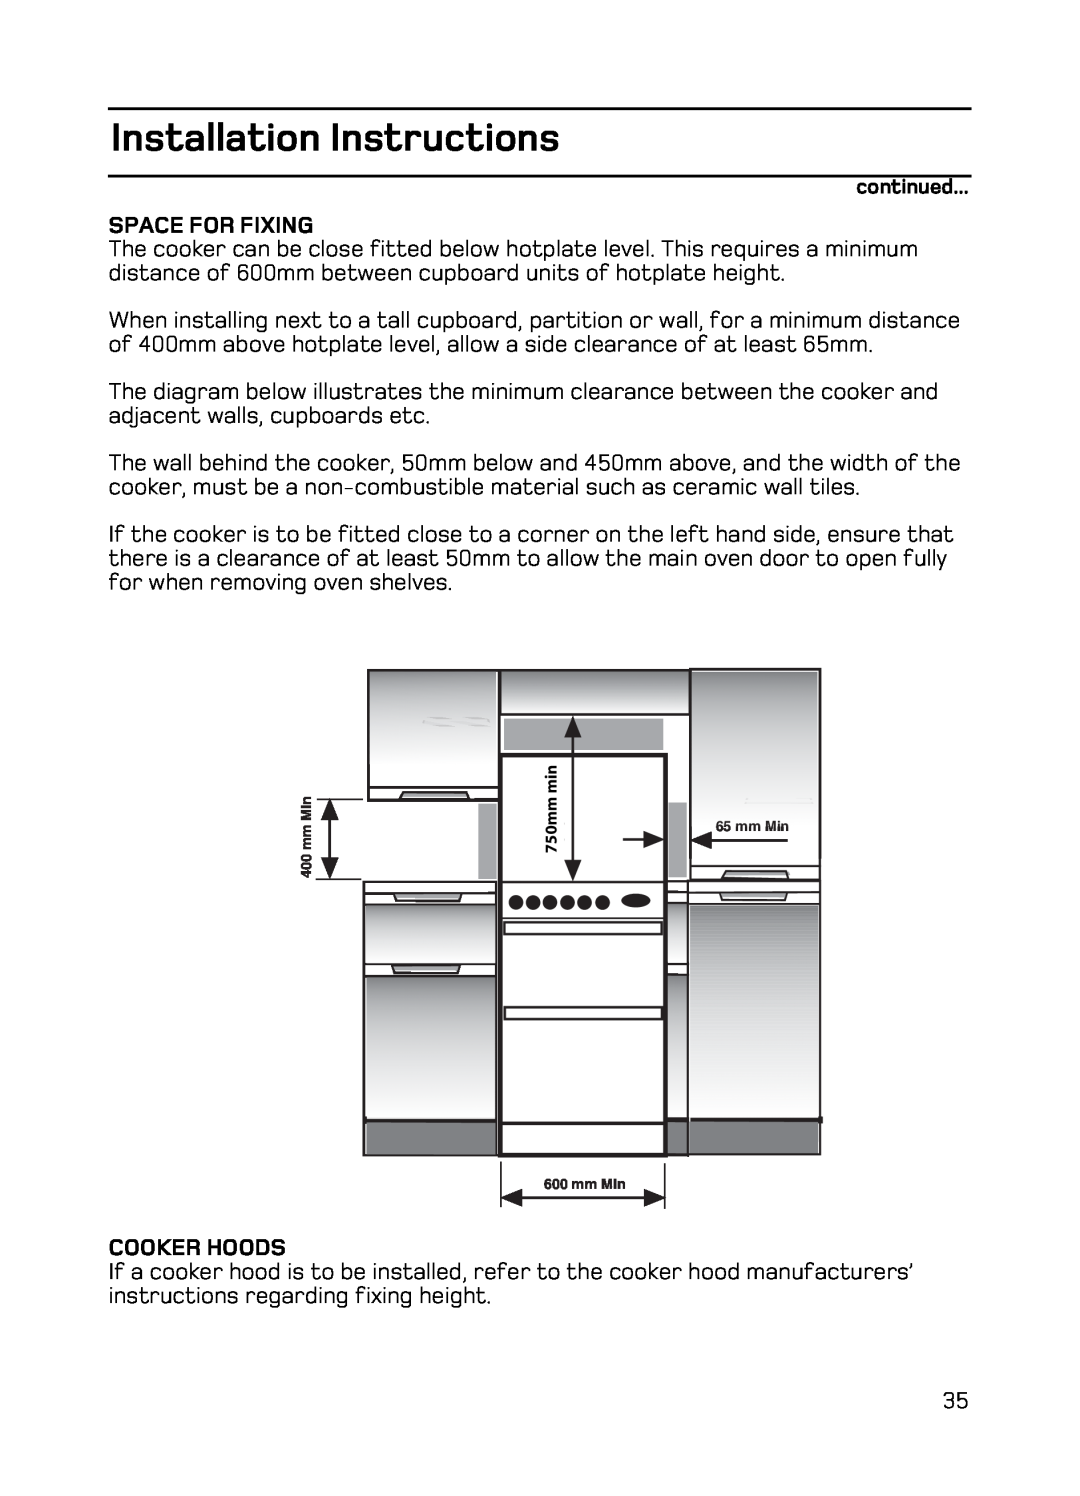 Hotpoint EG94 manual Space For Fixing, Cooker Hoods, Installation Instructions, 750mm 